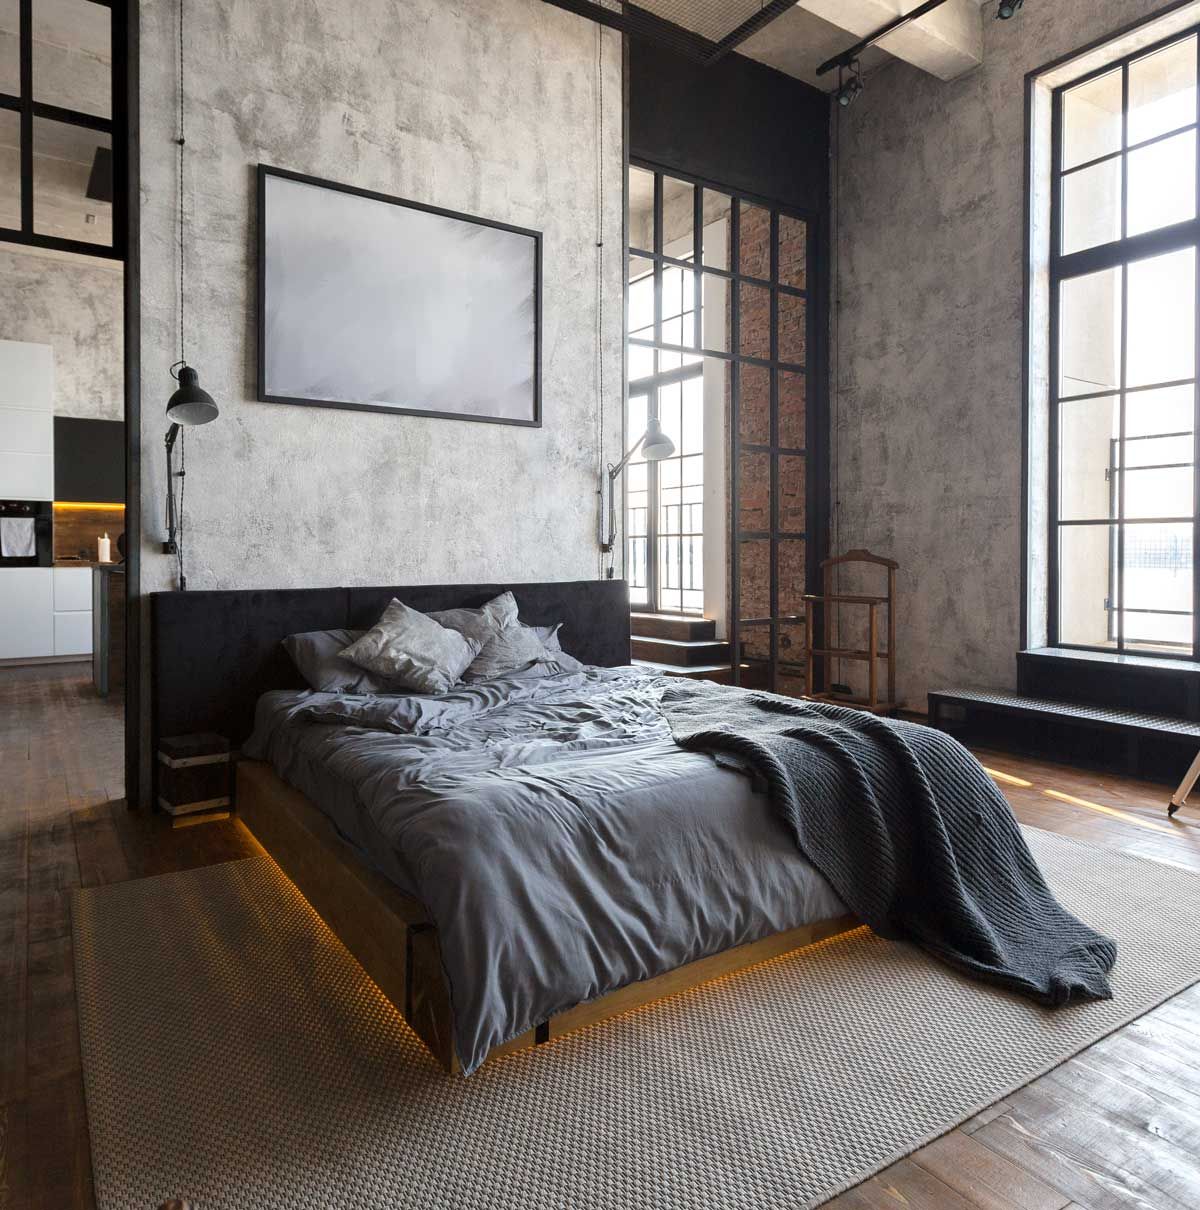 uxury studio apartment with a free layout in a loft style in dark colors.